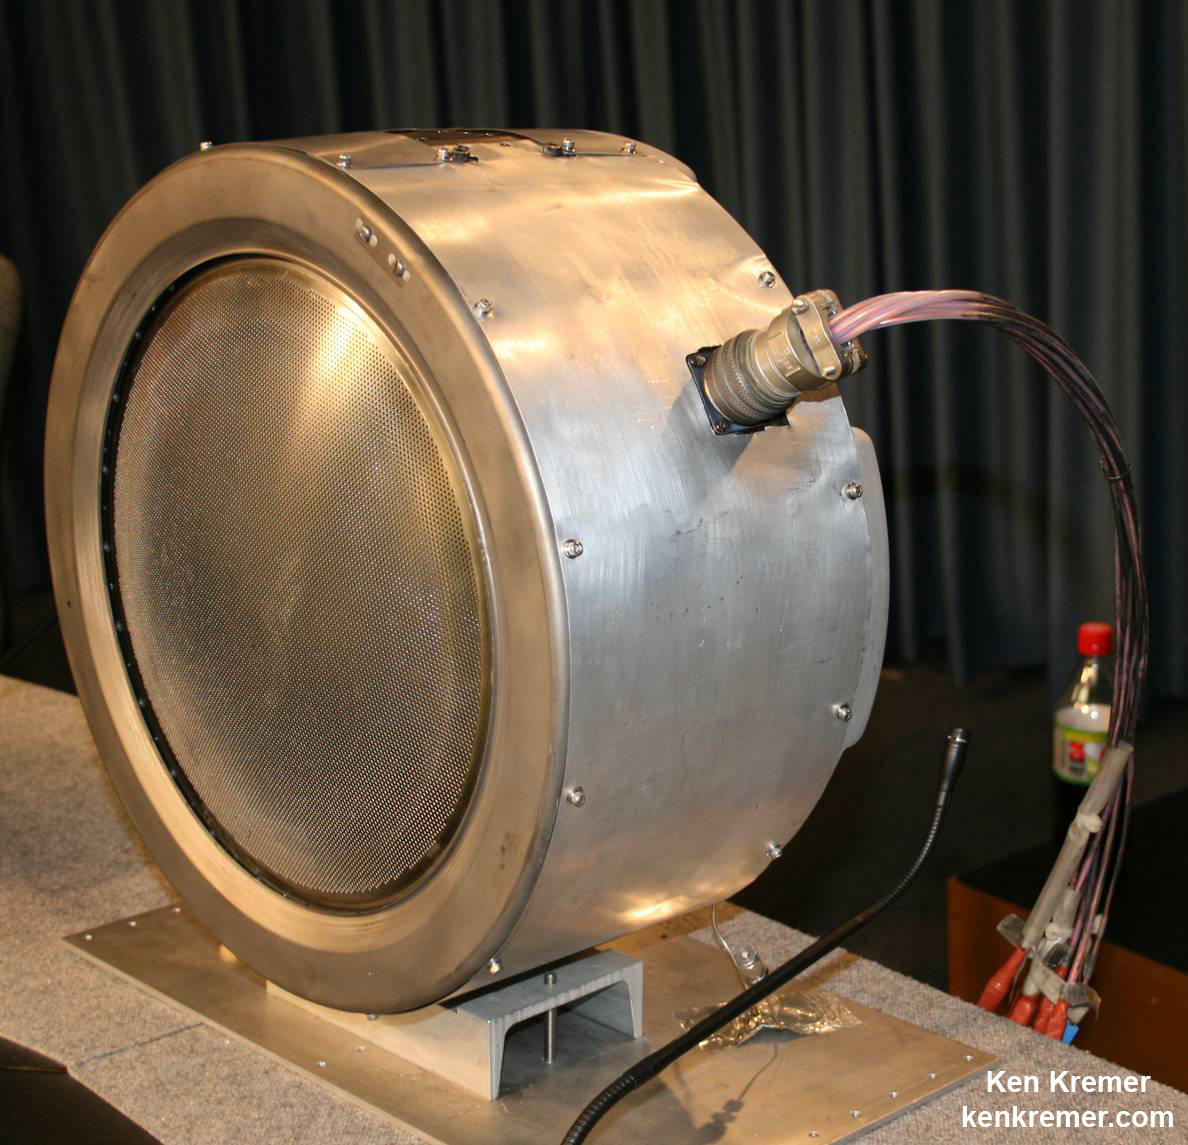 Dawn's ion thruster.  An engineering model of one of Dawn's three ion thrusters, which use electrical power to ionize xenon gas and accelerate it to a speed 10 times that of chemical engines. Each thruster is 30 centimeters (12 inches) in diameter and is steerable in two axes. Credit: Ken Kremer - kenkremer.com